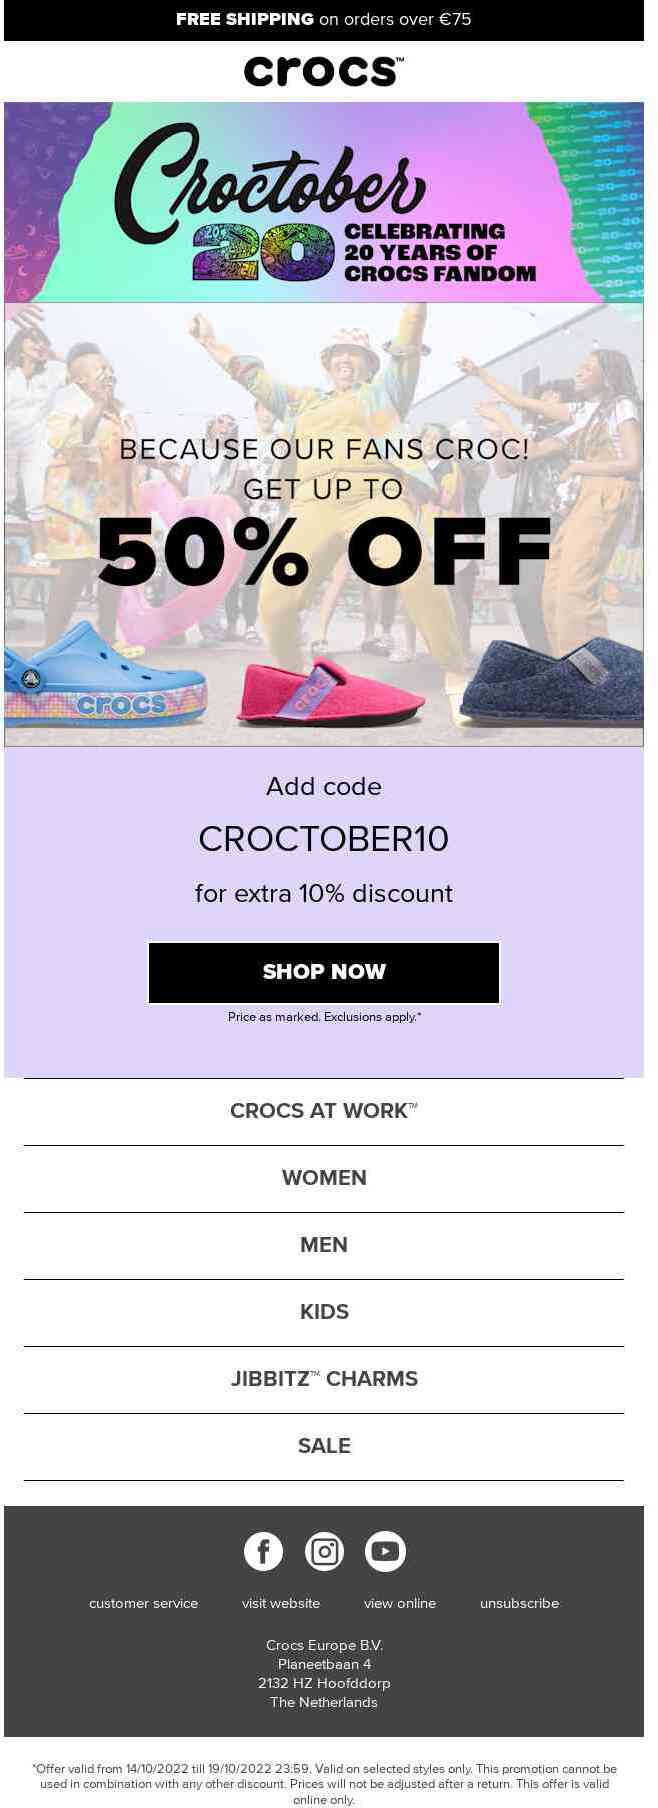 Croctober is wrapping up! Get up to 50% OFF before it ends.